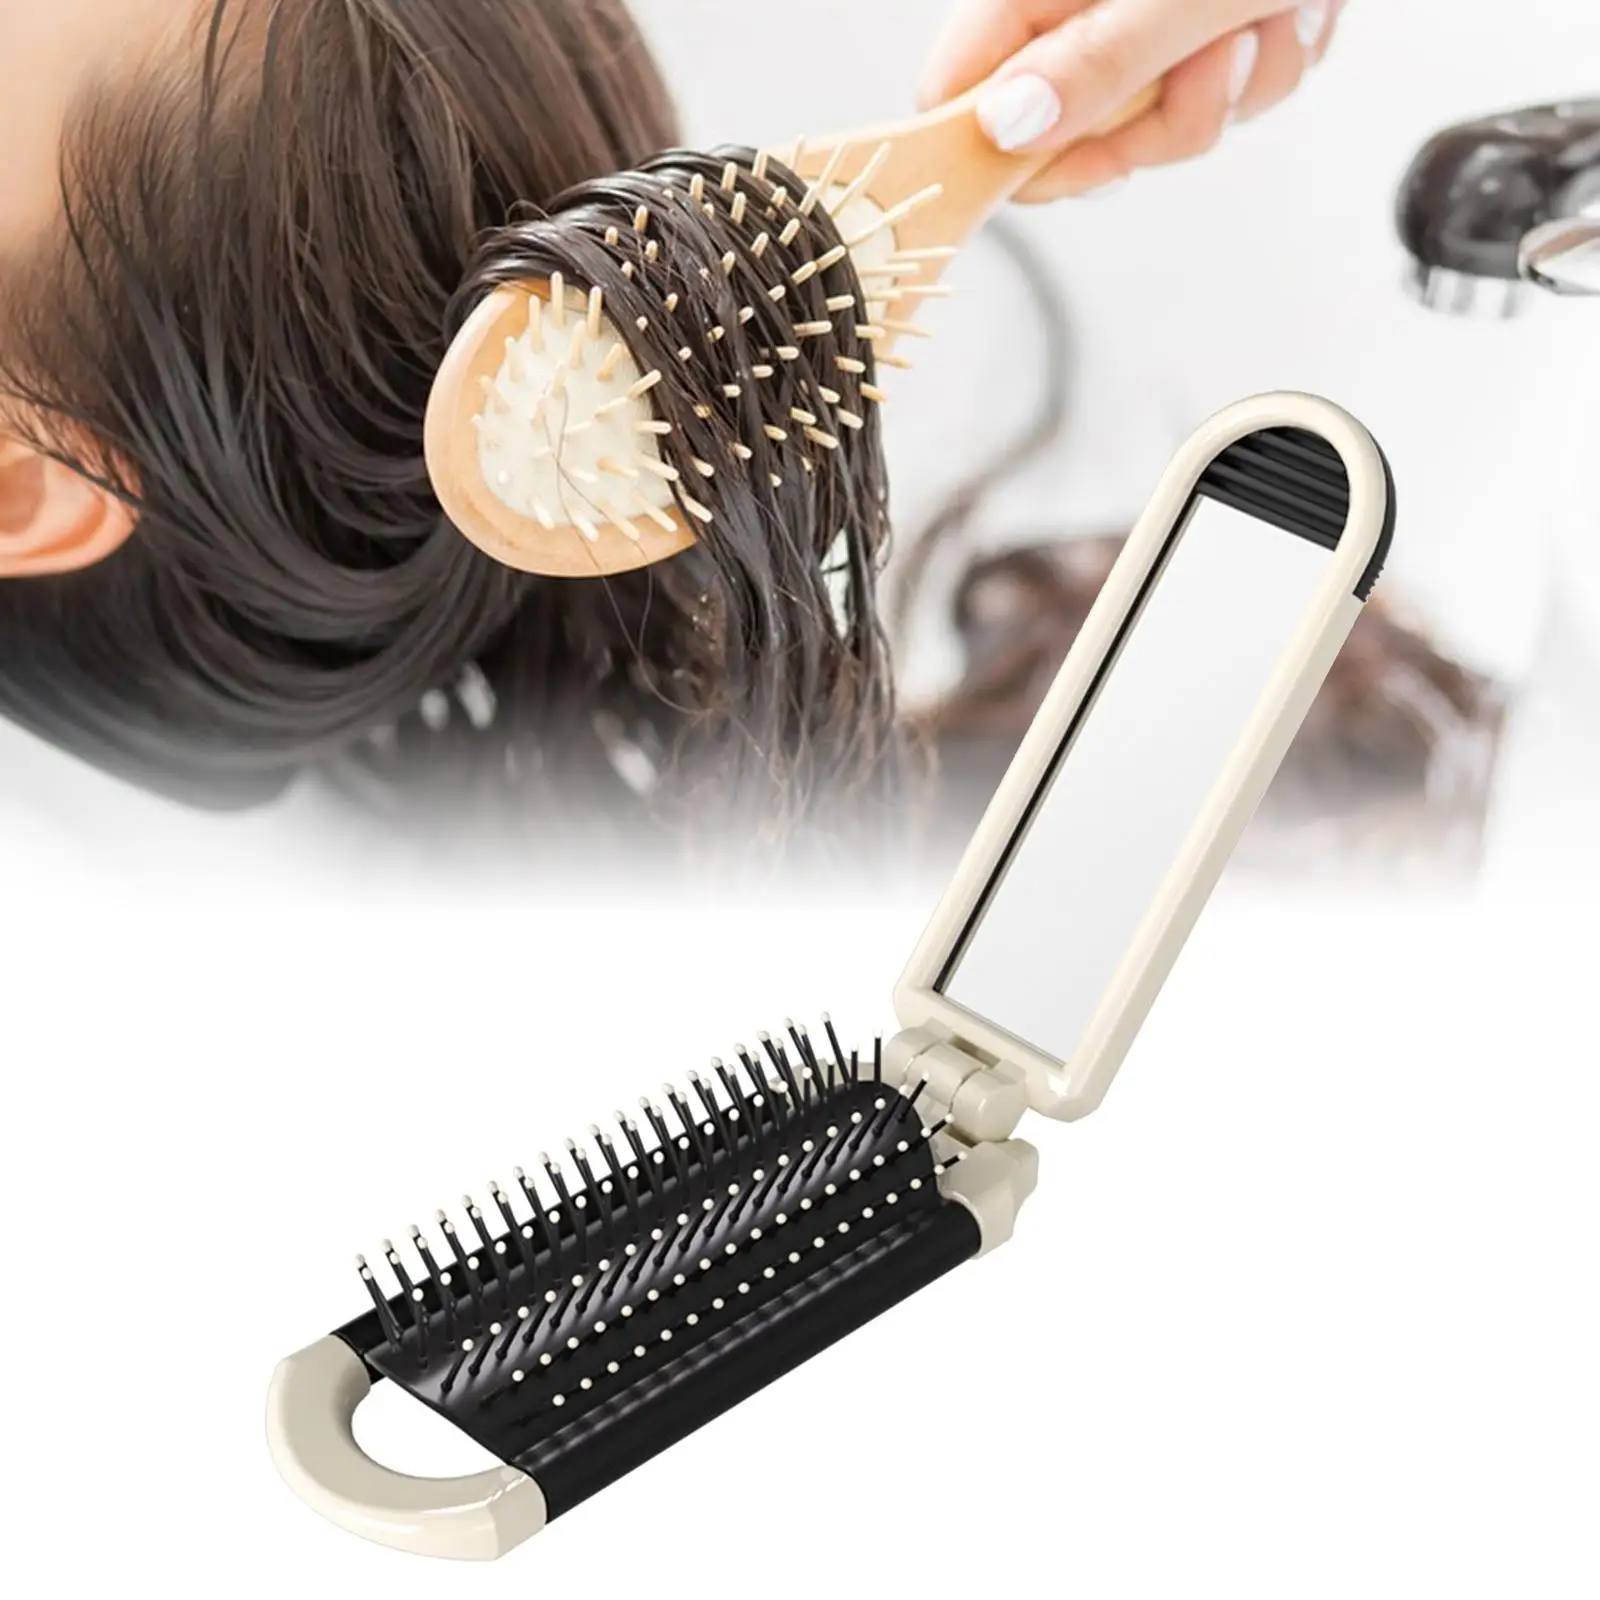 Folding Hair Brush with Makeup Mirror Compact Hair Styling Tool Small Hairbrush Mini Hair Comb for Bag Gym Trip Women Men